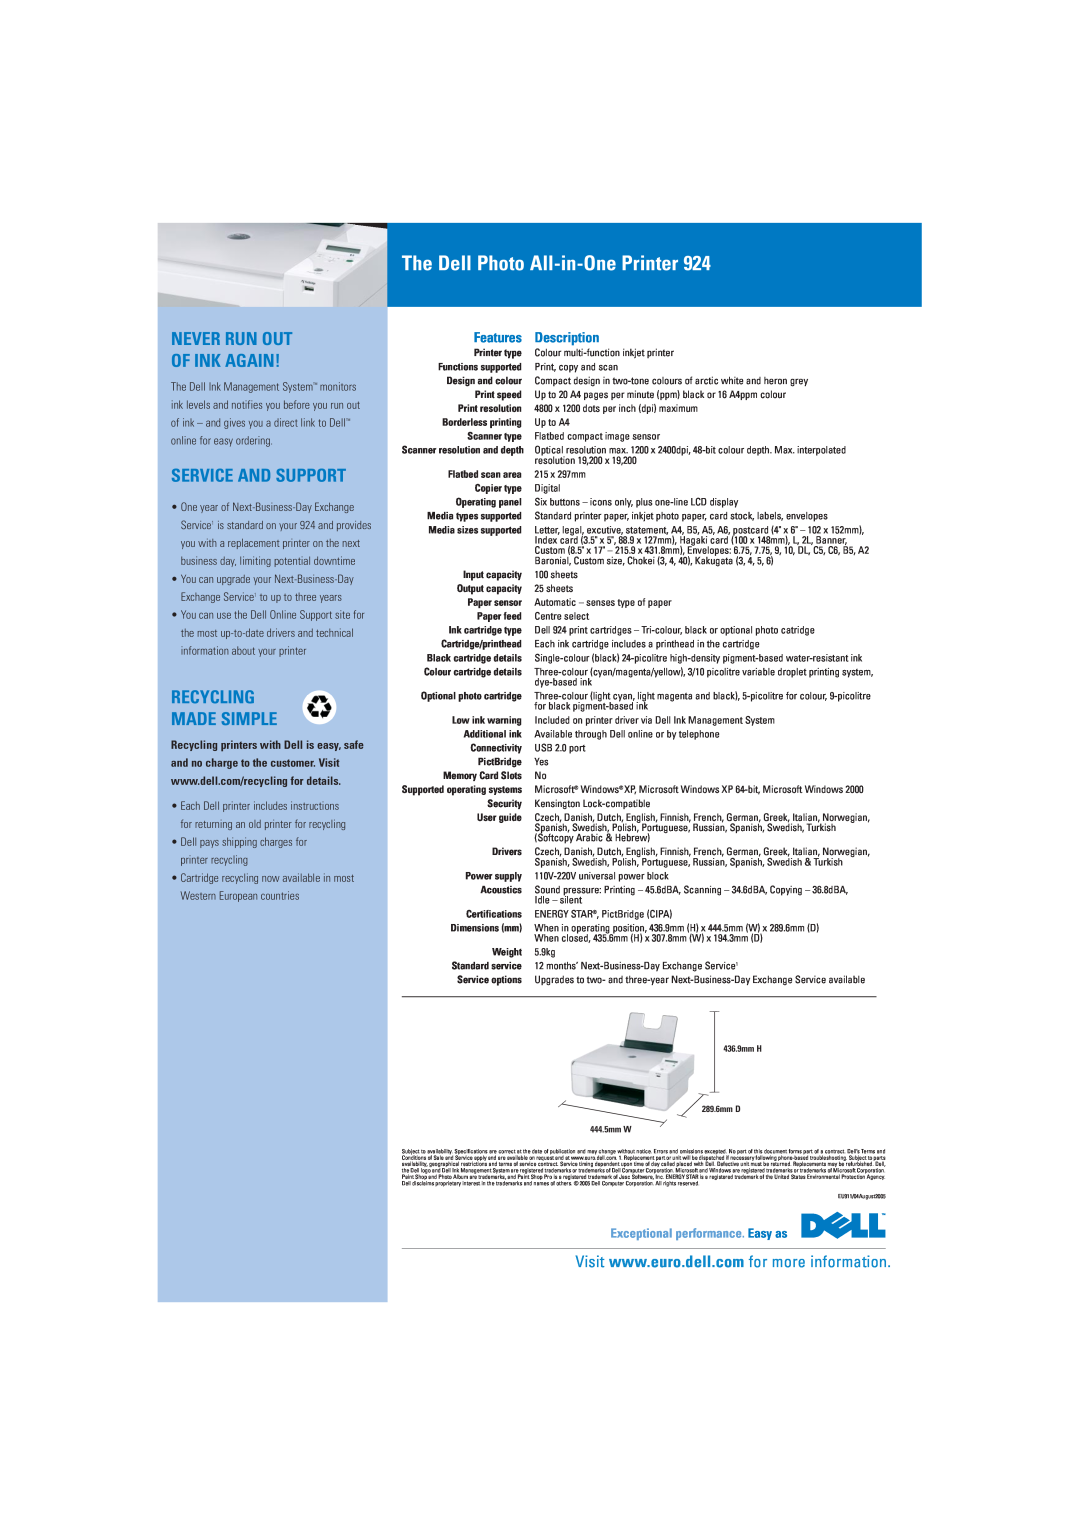 Dell 924 brochure The Dell Photo All-in-One Printer, Never Run Out Of Ink Again, Service And Support, Recycling Made Simple 